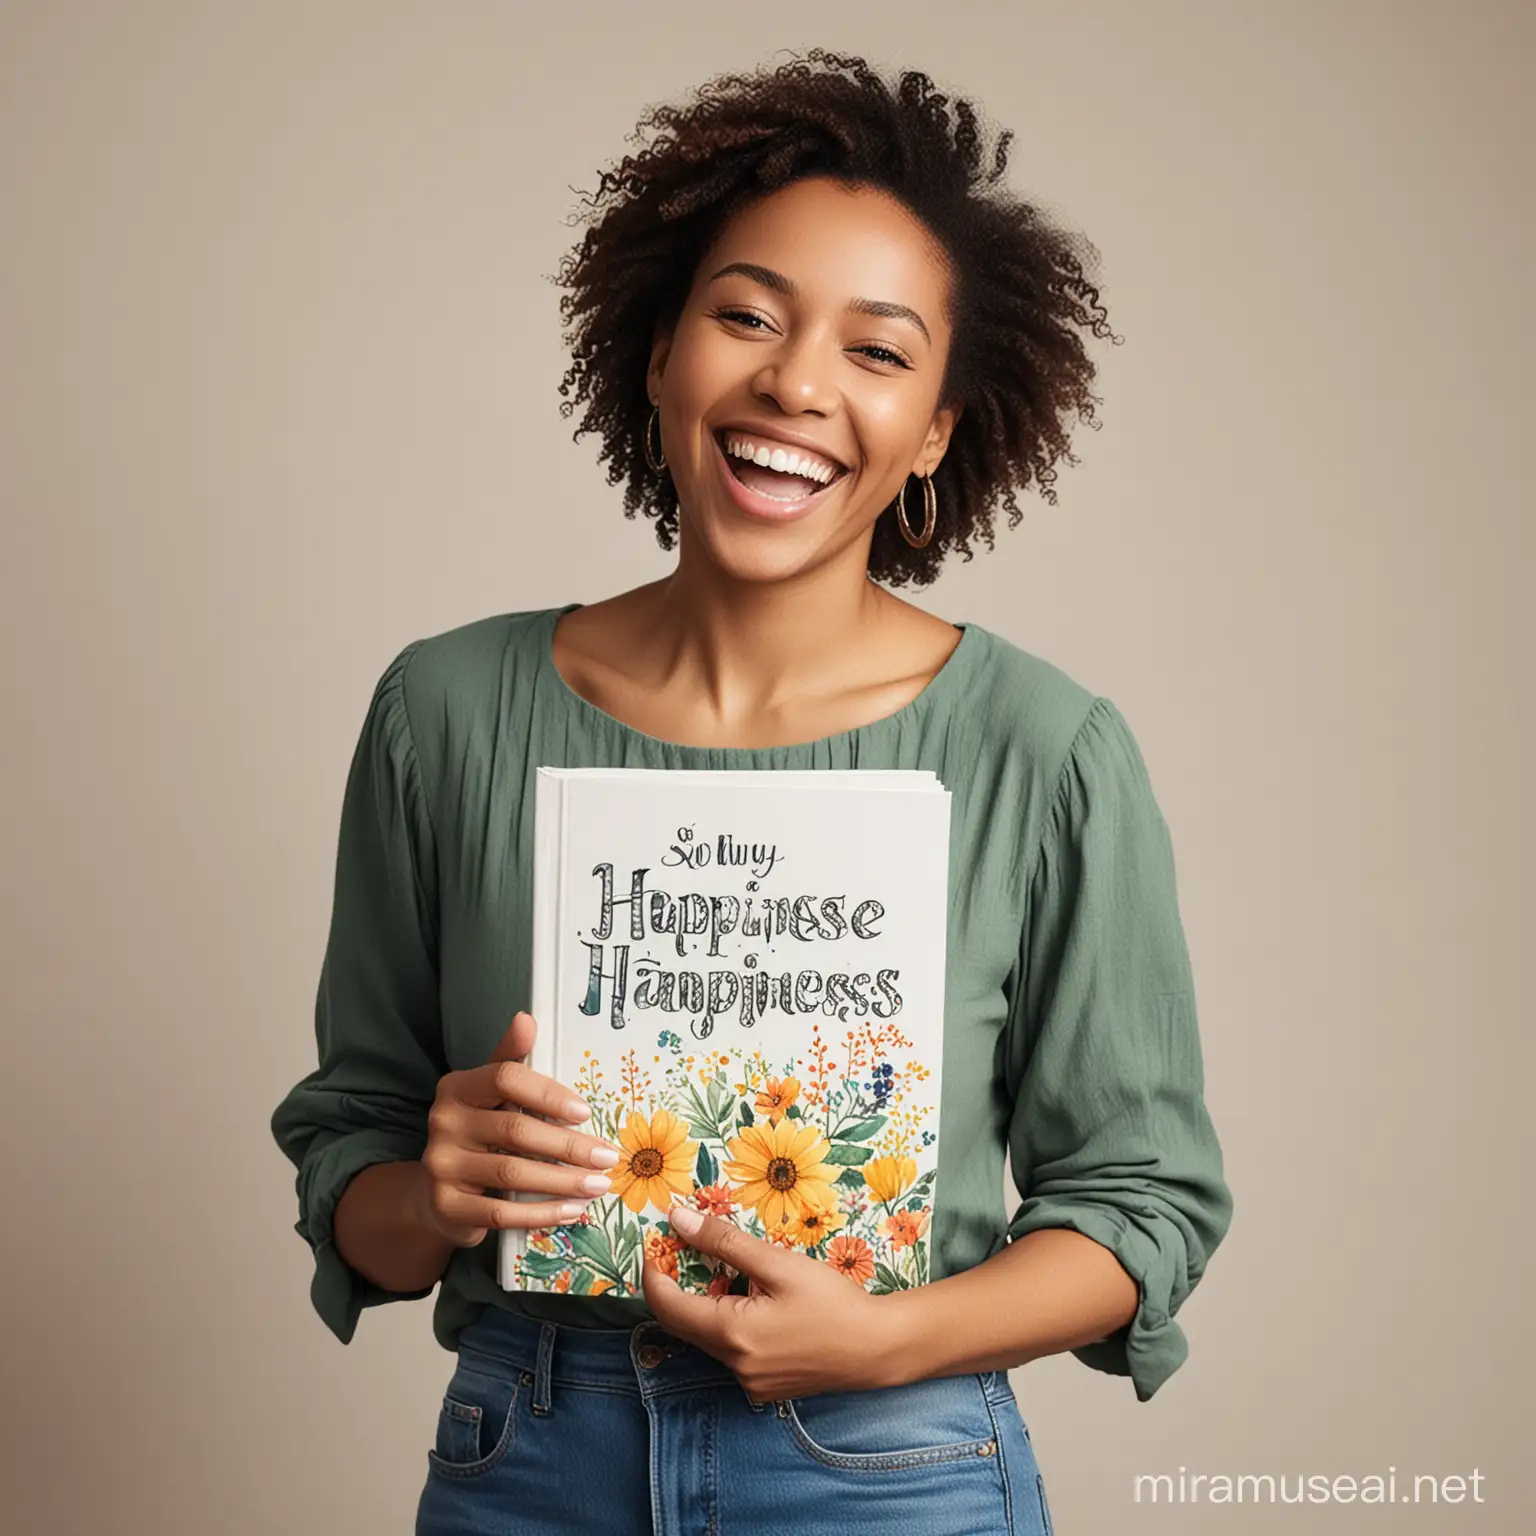 Joyful Woman Holding Project Book with Happiness